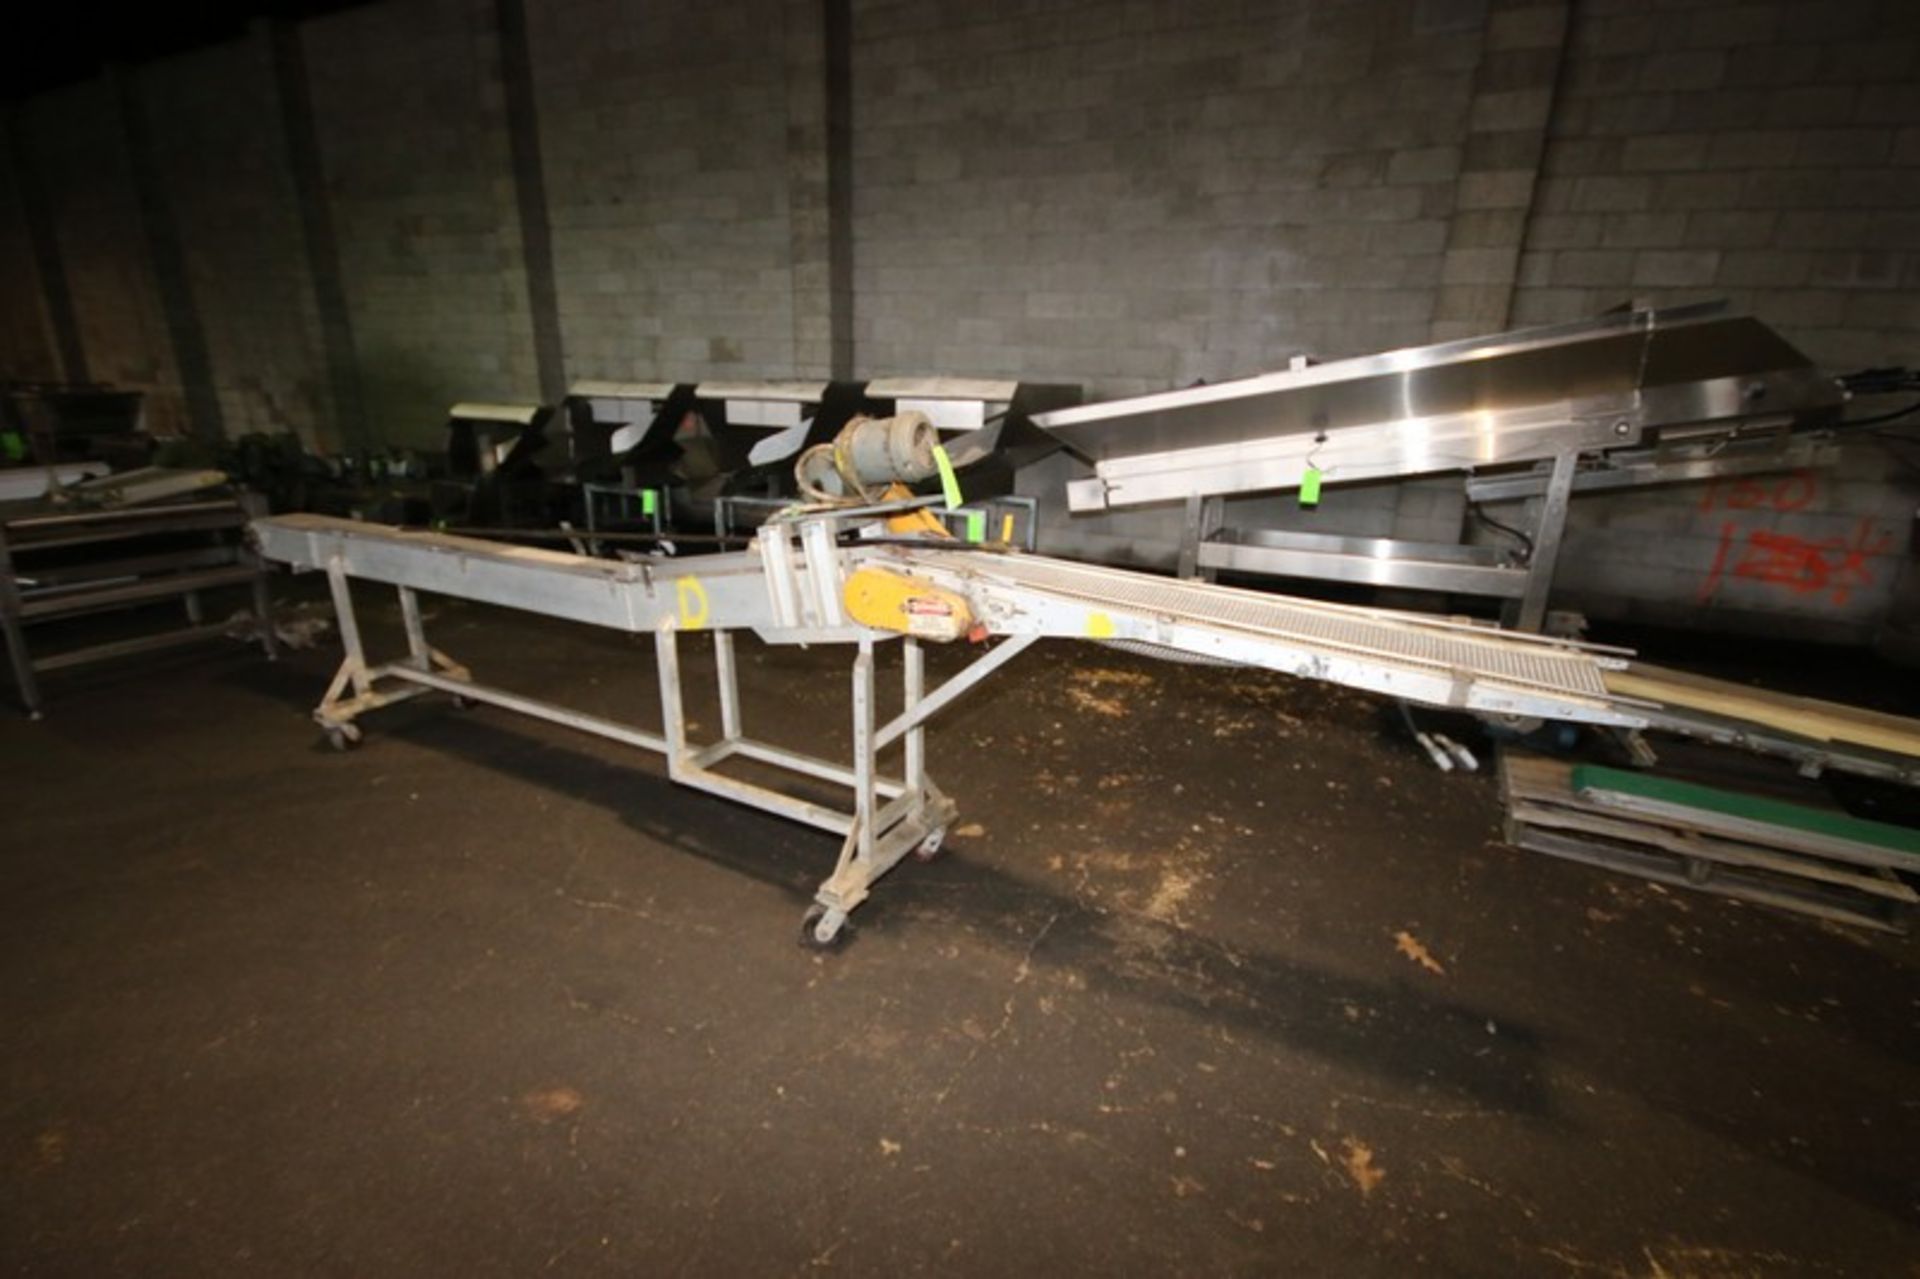 S/S Straight Section of Conveyor, with S/S Mesh Discharge Conveyor, with 3/4 hp Motor, with 1750 RPM